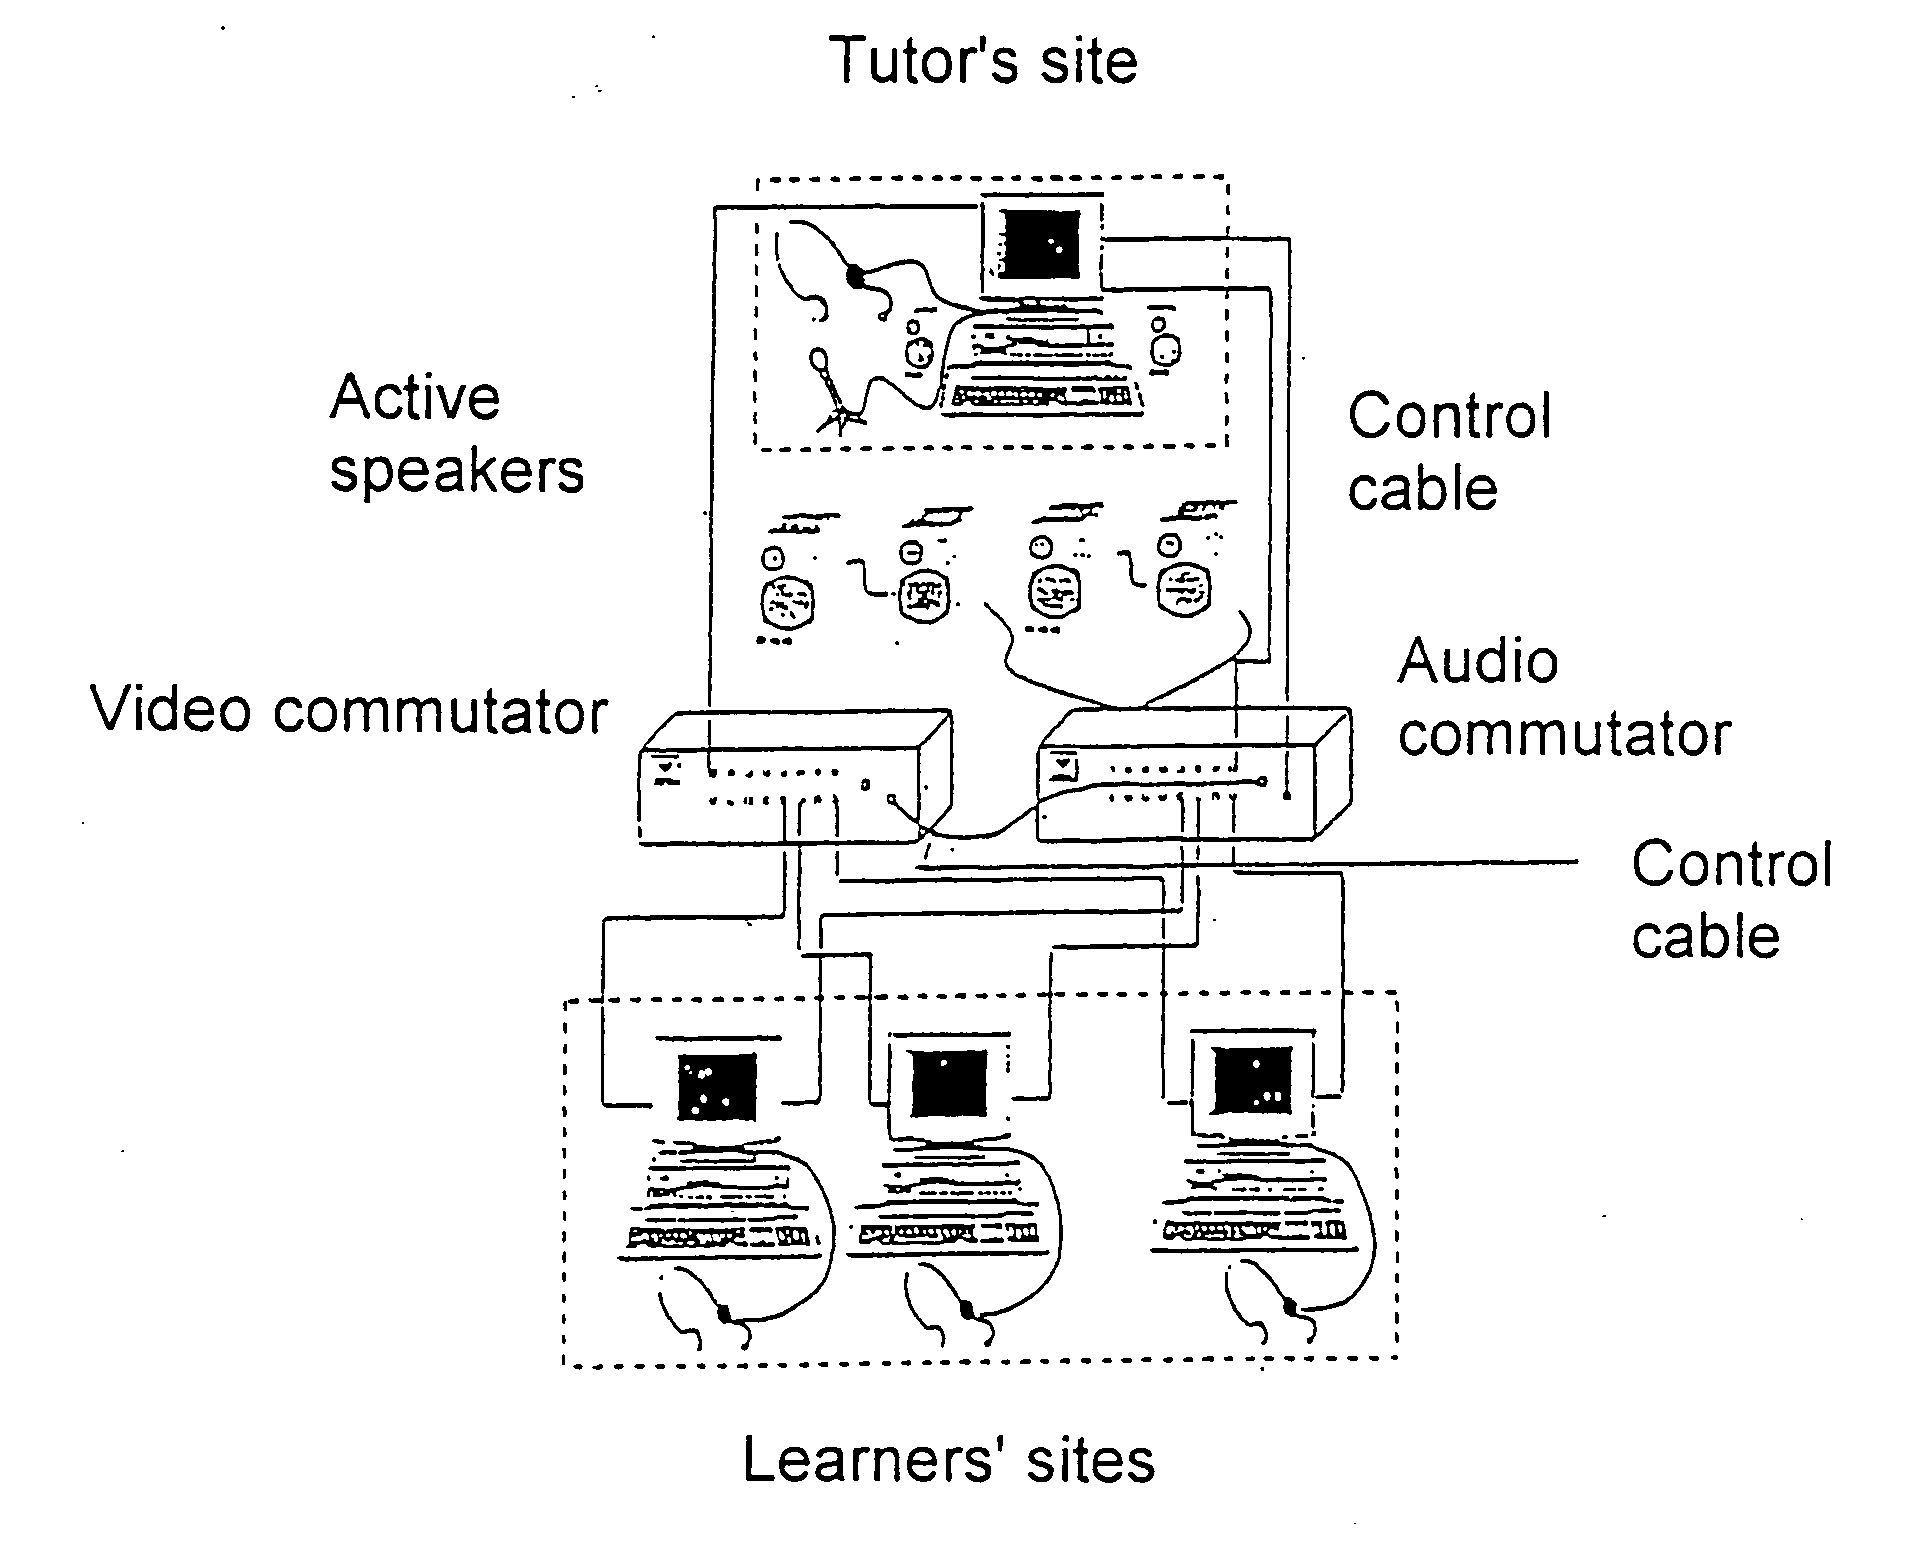 Audio-video communication device for computer users